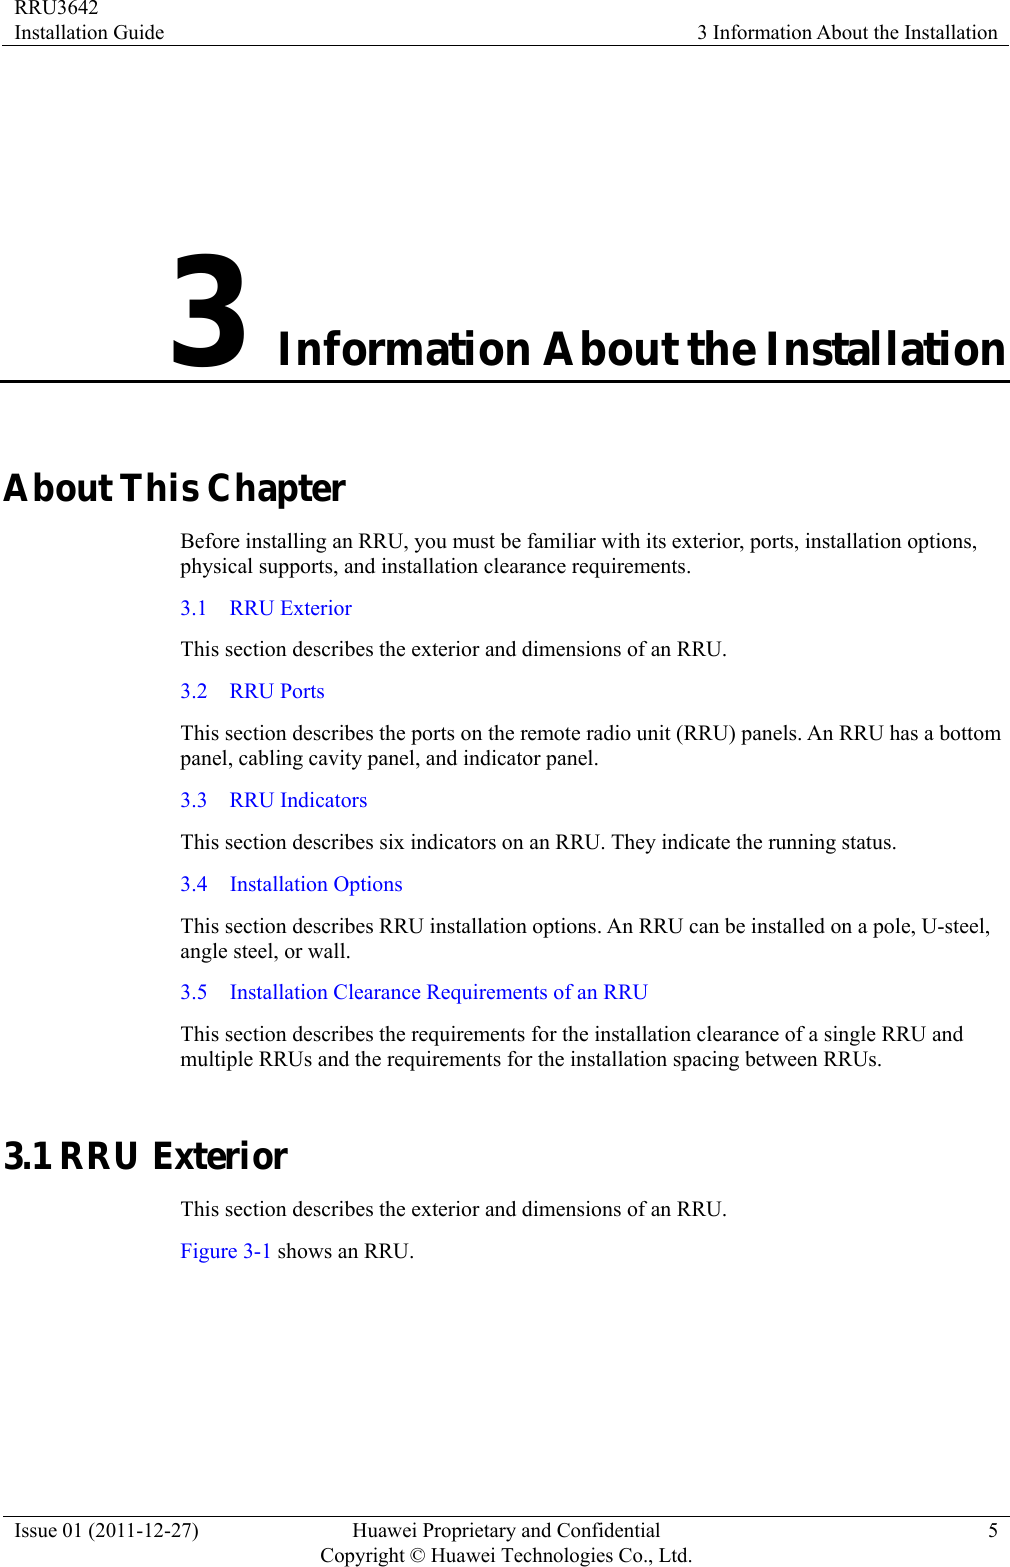 RRU3642 Installation Guide  3 Information About the Installation Issue 01 (2011-12-27)  Huawei Proprietary and Confidential         Copyright © Huawei Technologies Co., Ltd.5 3 Information About the Installation About This Chapter Before installing an RRU, you must be familiar with its exterior, ports, installation options, physical supports, and installation clearance requirements. 3.1  RRU Exterior This section describes the exterior and dimensions of an RRU. 3.2  RRU Ports This section describes the ports on the remote radio unit (RRU) panels. An RRU has a bottom panel, cabling cavity panel, and indicator panel. 3.3  RRU Indicators This section describes six indicators on an RRU. They indicate the running status.   3.4  Installation Options This section describes RRU installation options. An RRU can be installed on a pole, U-steel, angle steel, or wall. 3.5    Installation Clearance Requirements of an RRU This section describes the requirements for the installation clearance of a single RRU and multiple RRUs and the requirements for the installation spacing between RRUs. 3.1 RRU Exterior This section describes the exterior and dimensions of an RRU. Figure 3-1 shows an RRU.   